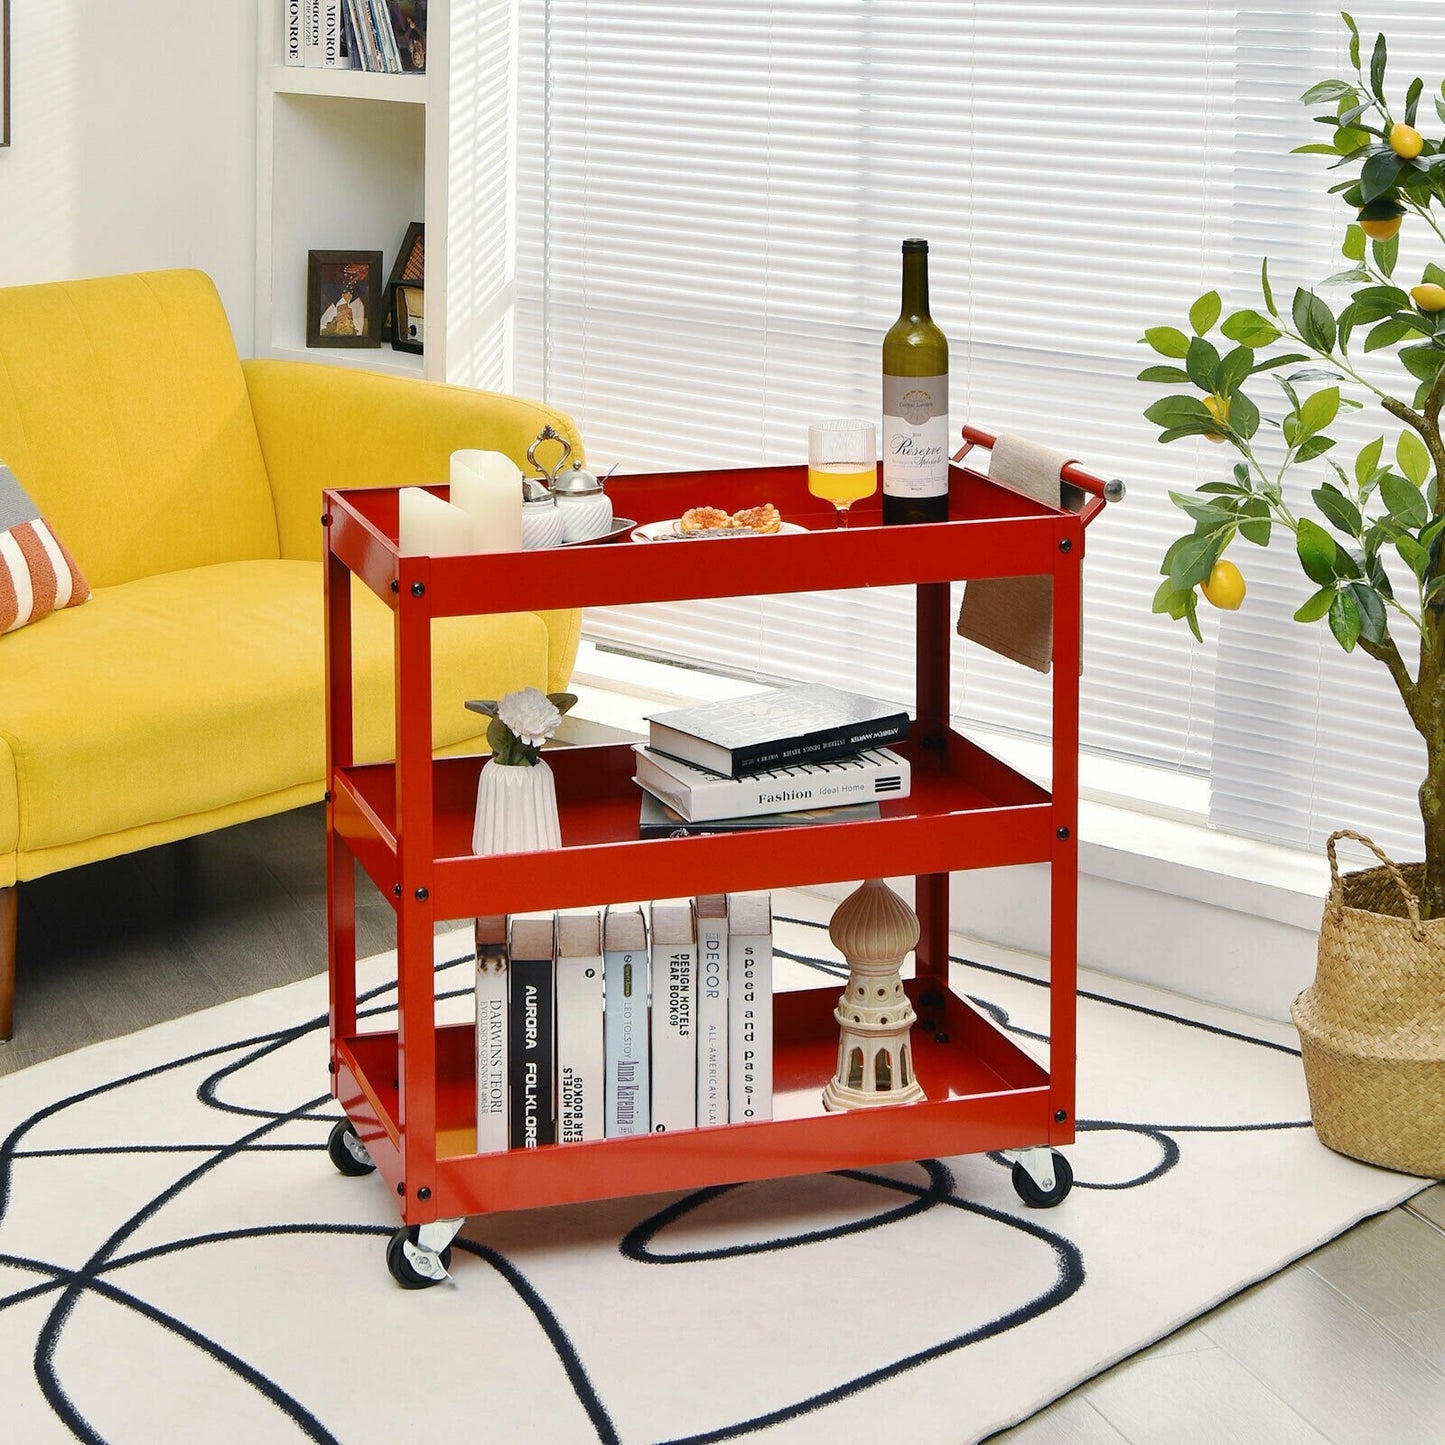 3-Tier Utility Cart Metal Mental Storage Service Trolley, Red at Gallery Canada